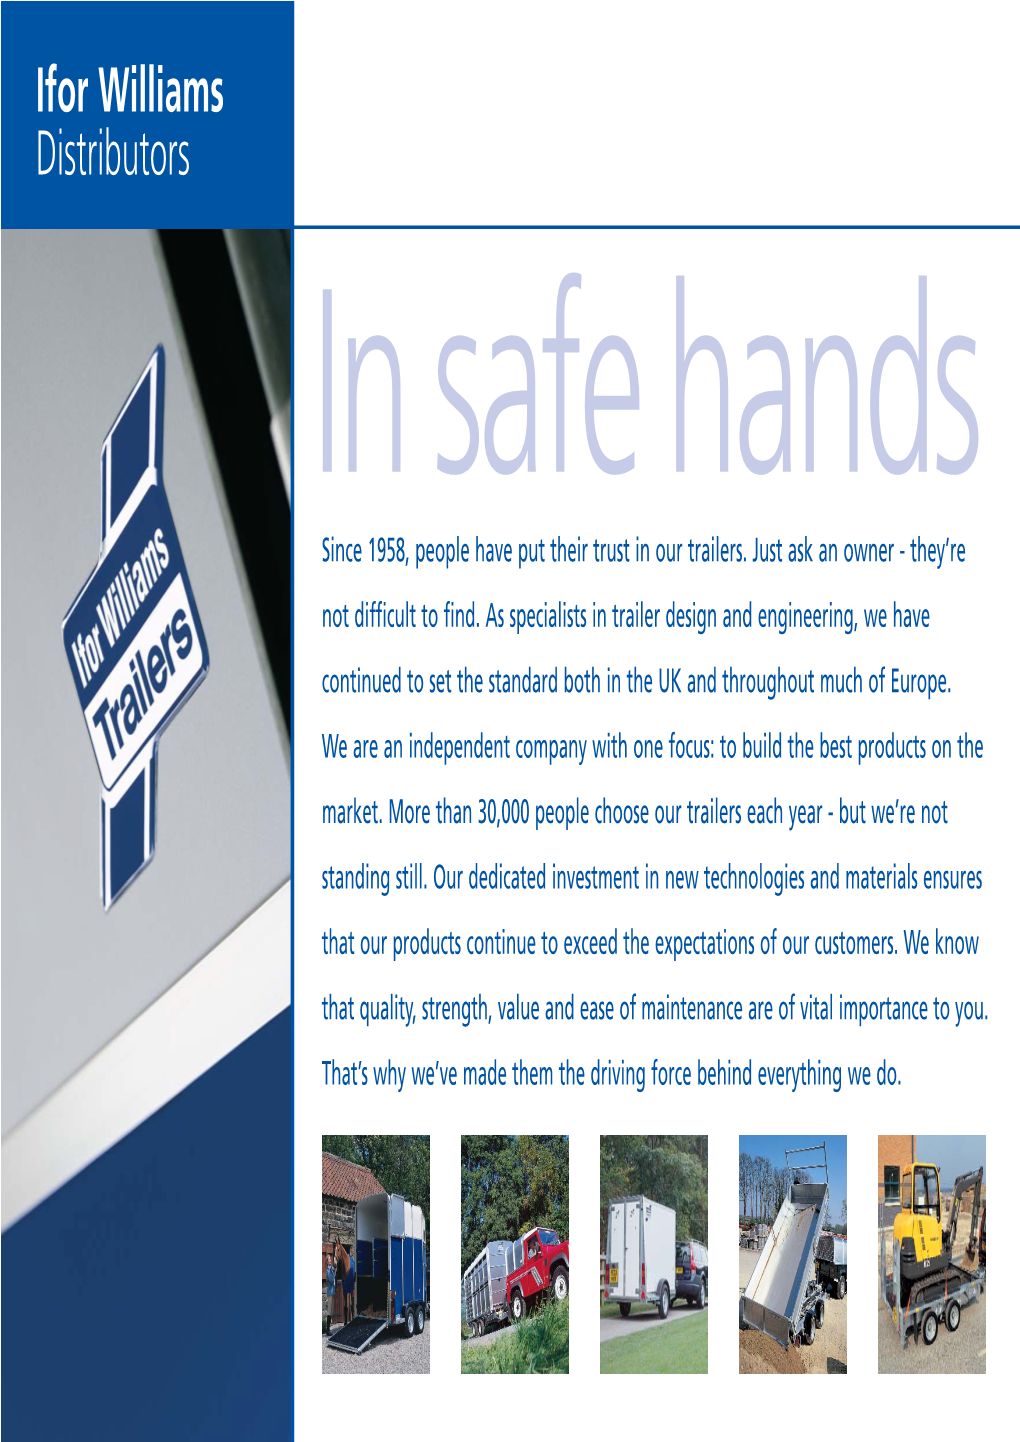 Distributors in Safe Hands Since 1958, People Have Put Their Trust in Our Trailers